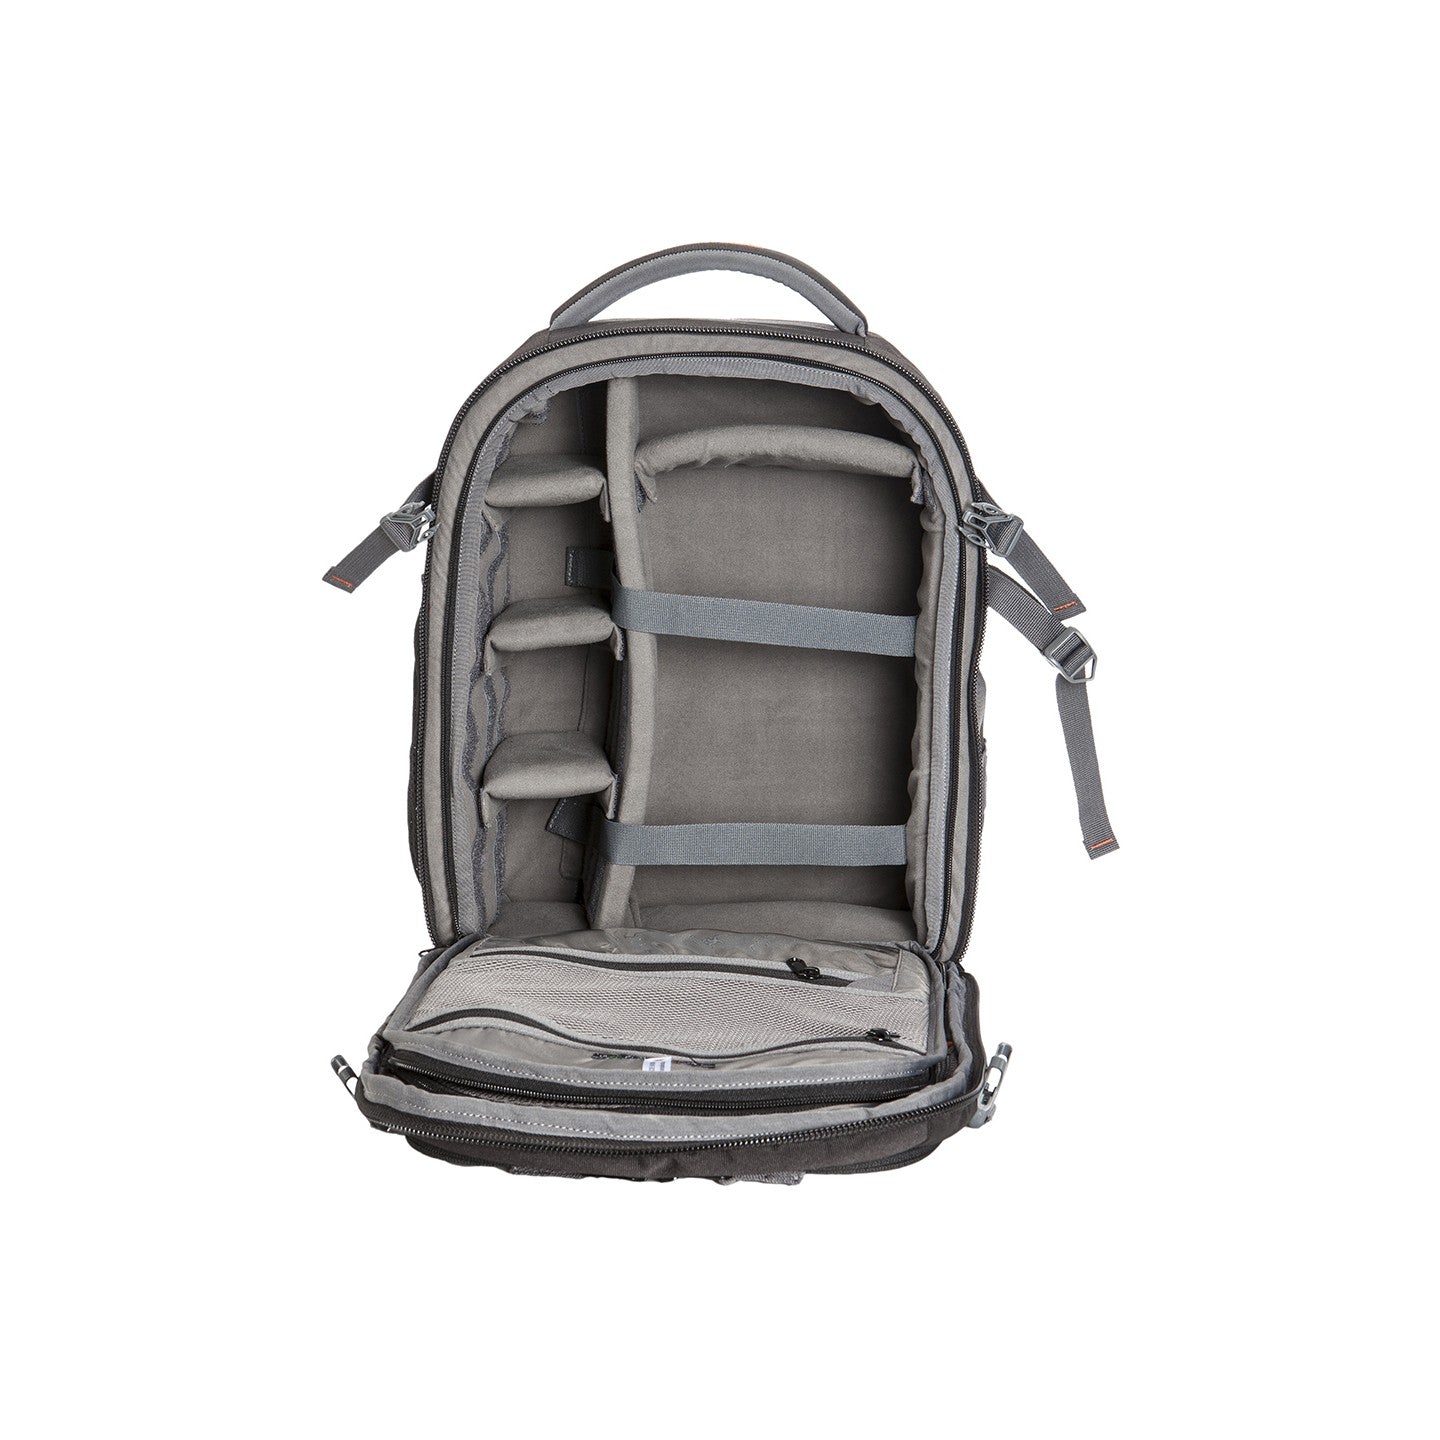 Image: Open view of the P36 Torino 1 video camera backpack, displaying its empty compartments and customizable dividers. The bag's spacious interior provides ample storage options for video cameras, lenses, accessories, and other equipment. Stay organized and ready for your next video shoot with the versatile storage capabilities of the P36 Torino 1.